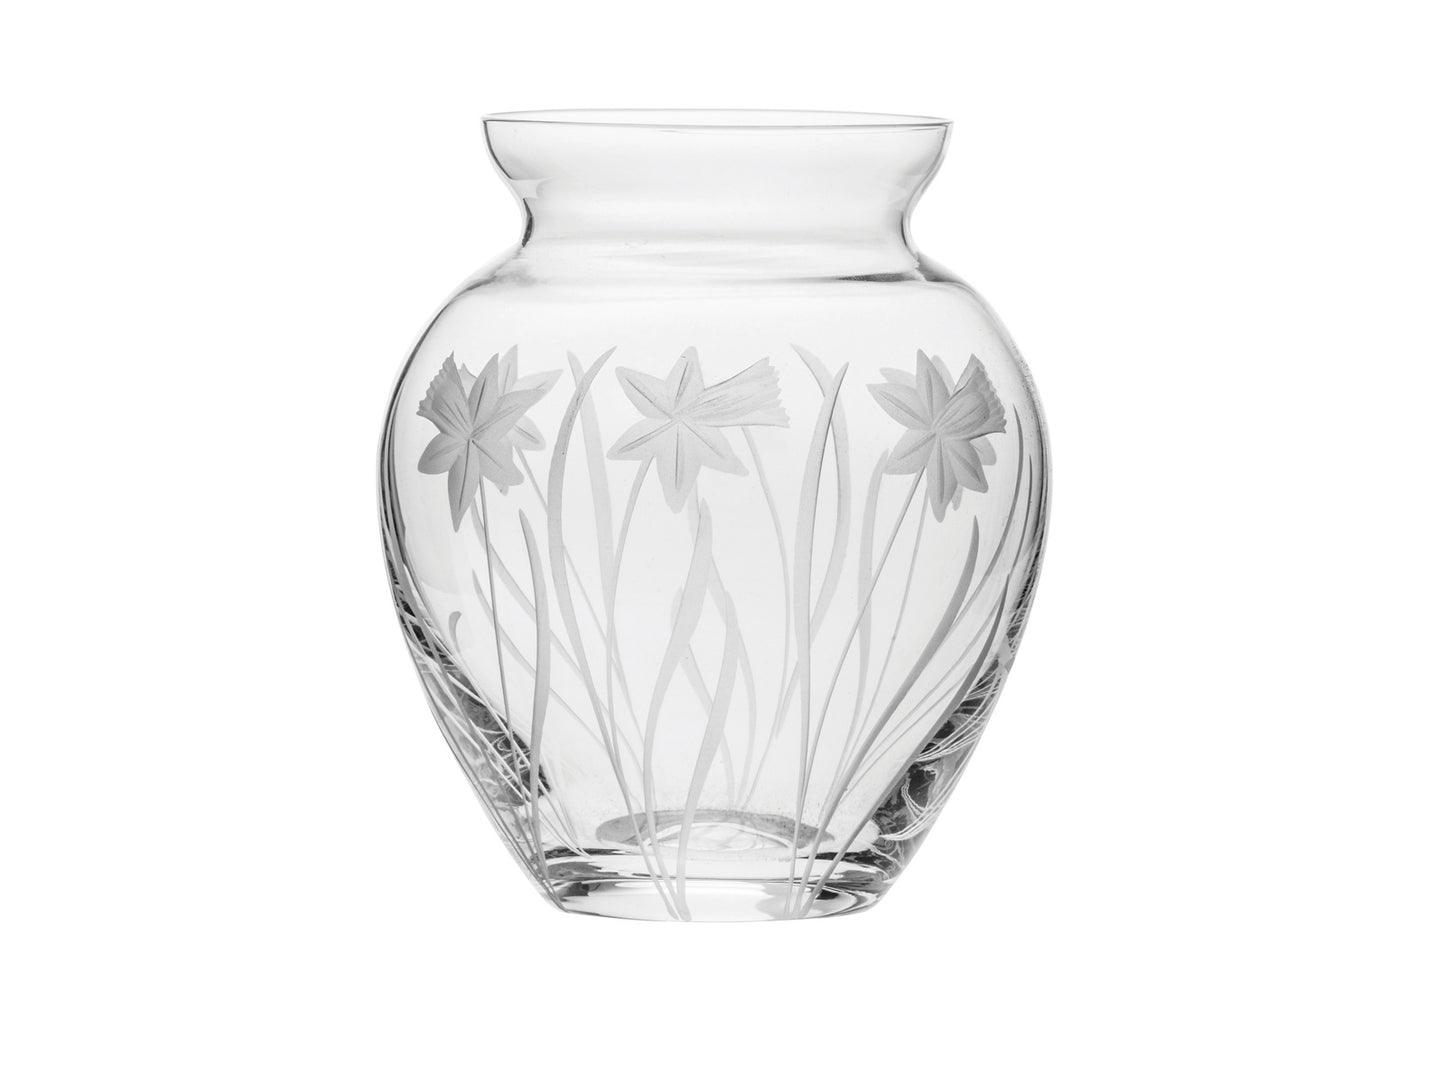 A small crystal vase with daffodils engraved around the outside